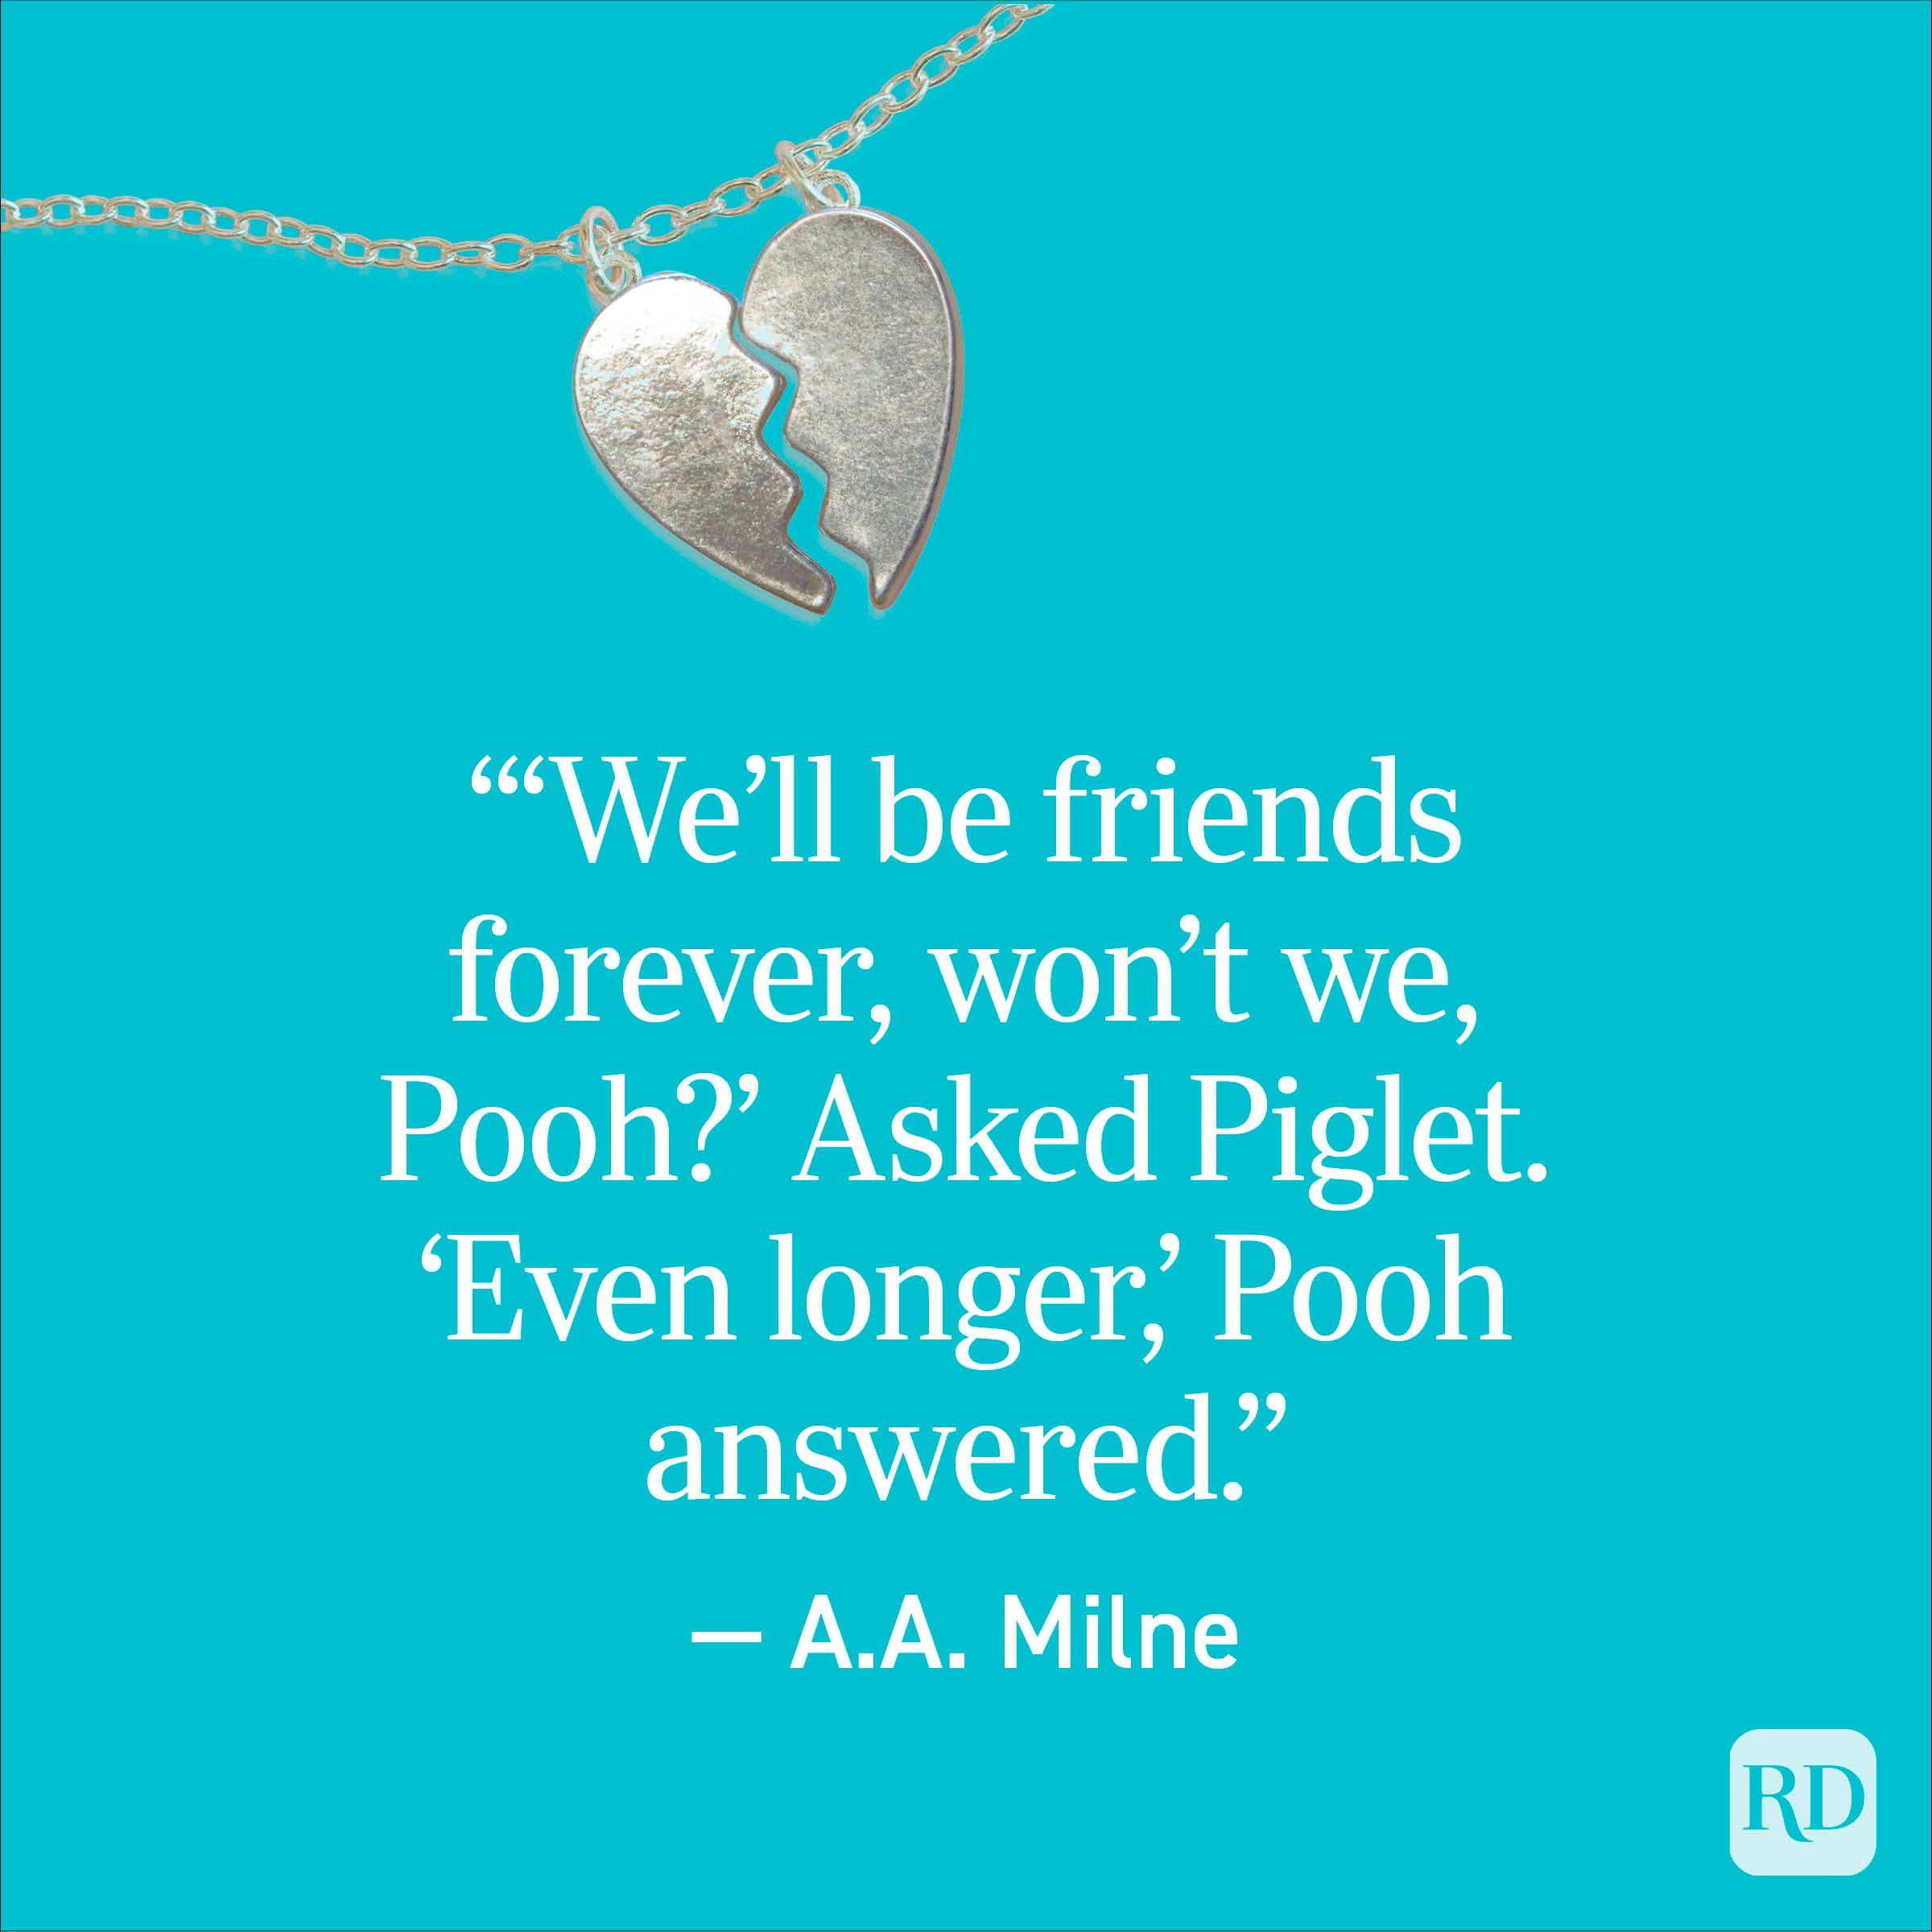 “‘We’ll be friends forever, won’t we, Pooh?’ Asked Piglet. ‘Even longer,’ Pooh answered.” — A.A. Milne